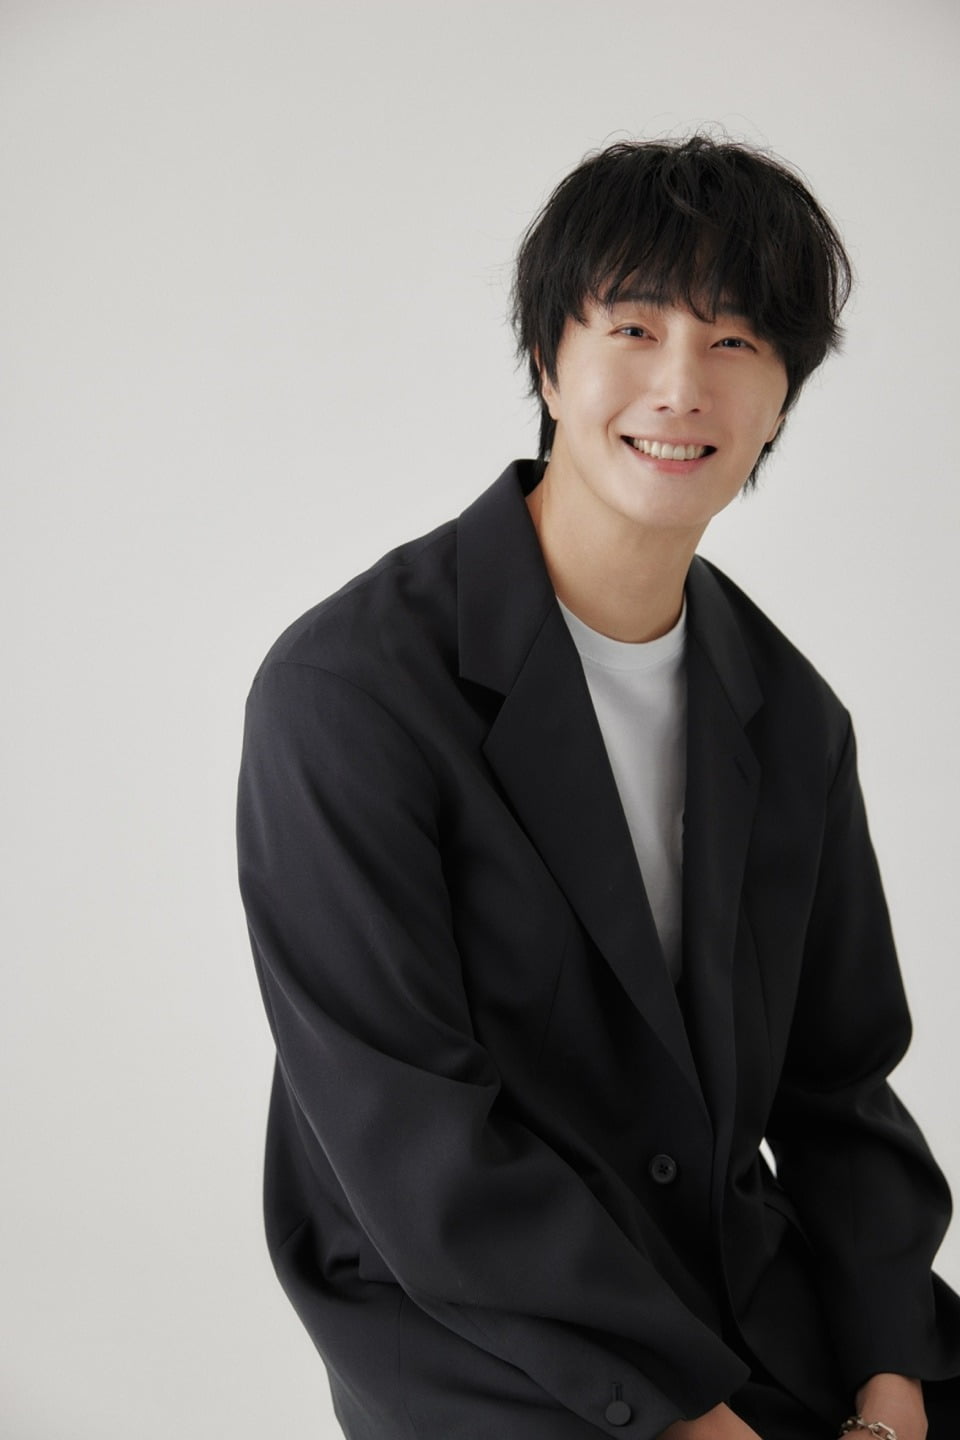 Jung Il-woo successfully returns to theater after 5 years